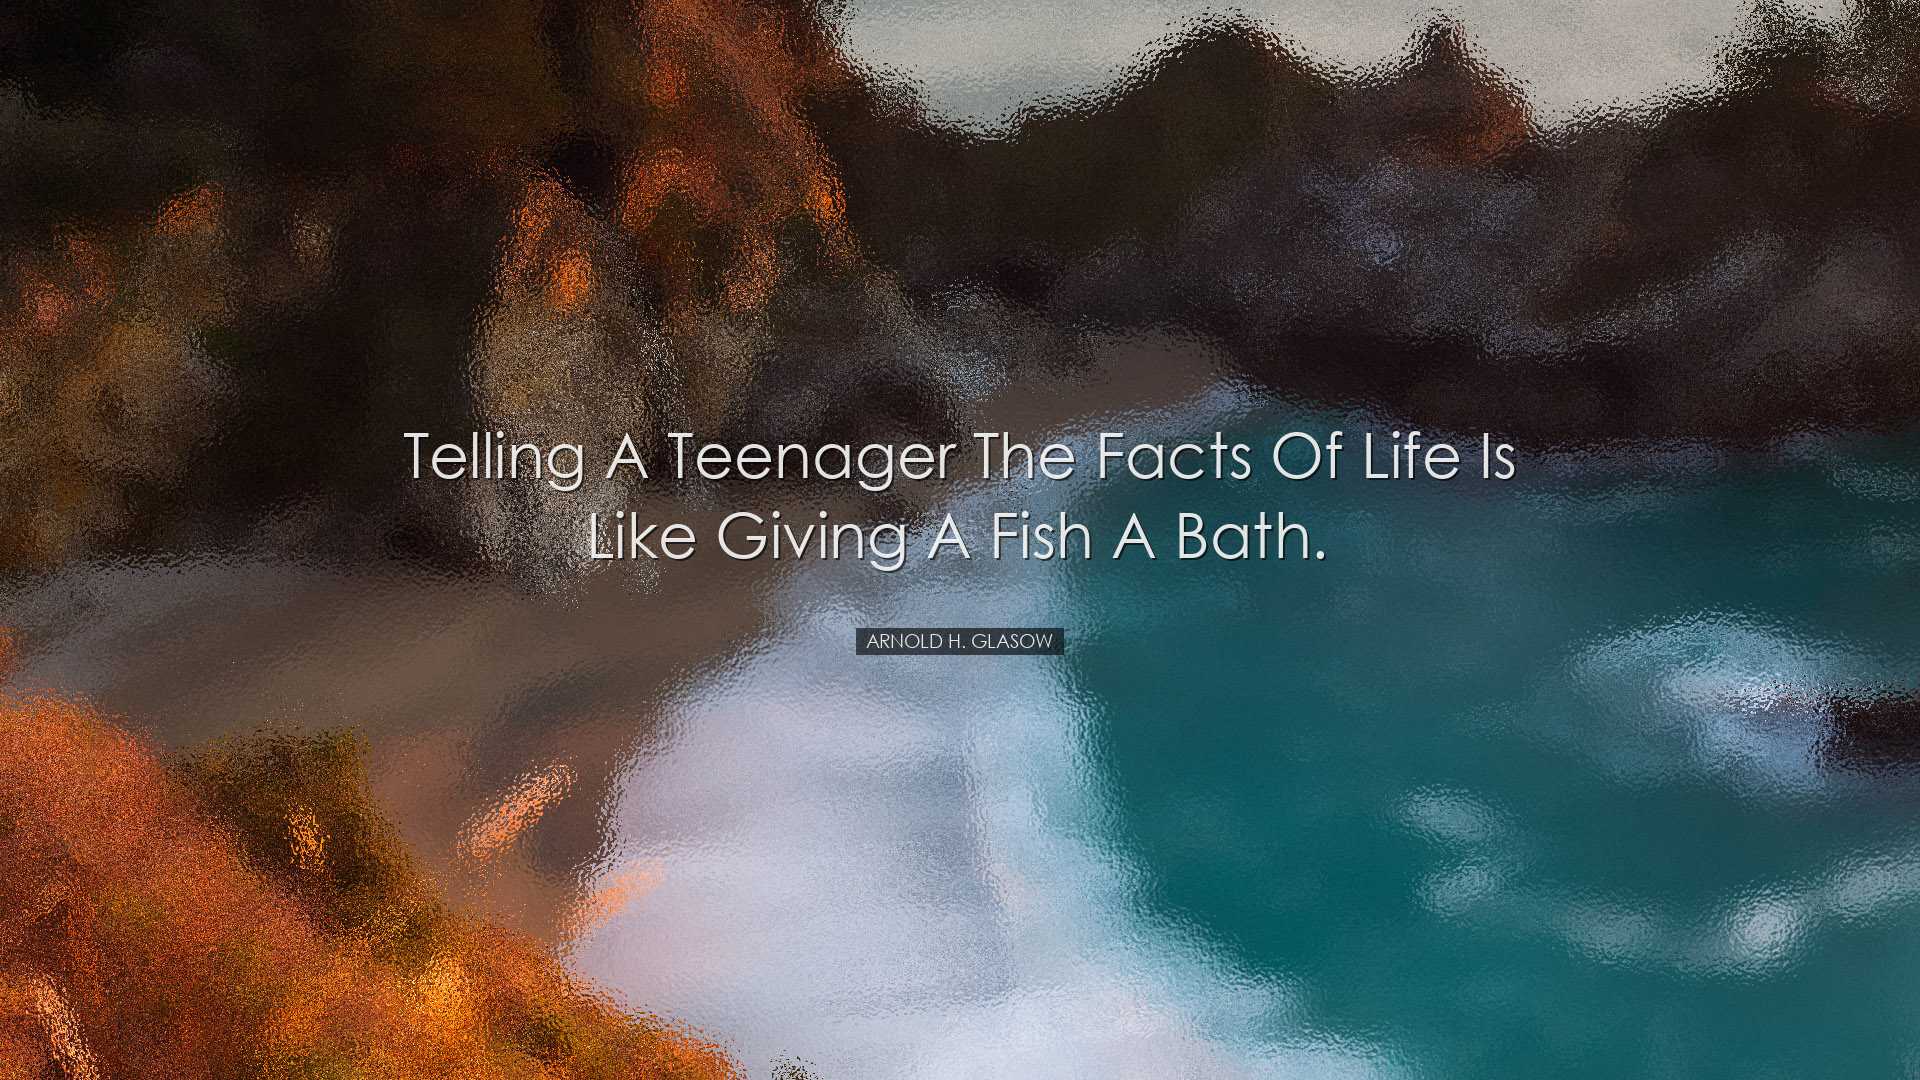 Telling a teenager the facts of life is like giving a fish a bath.